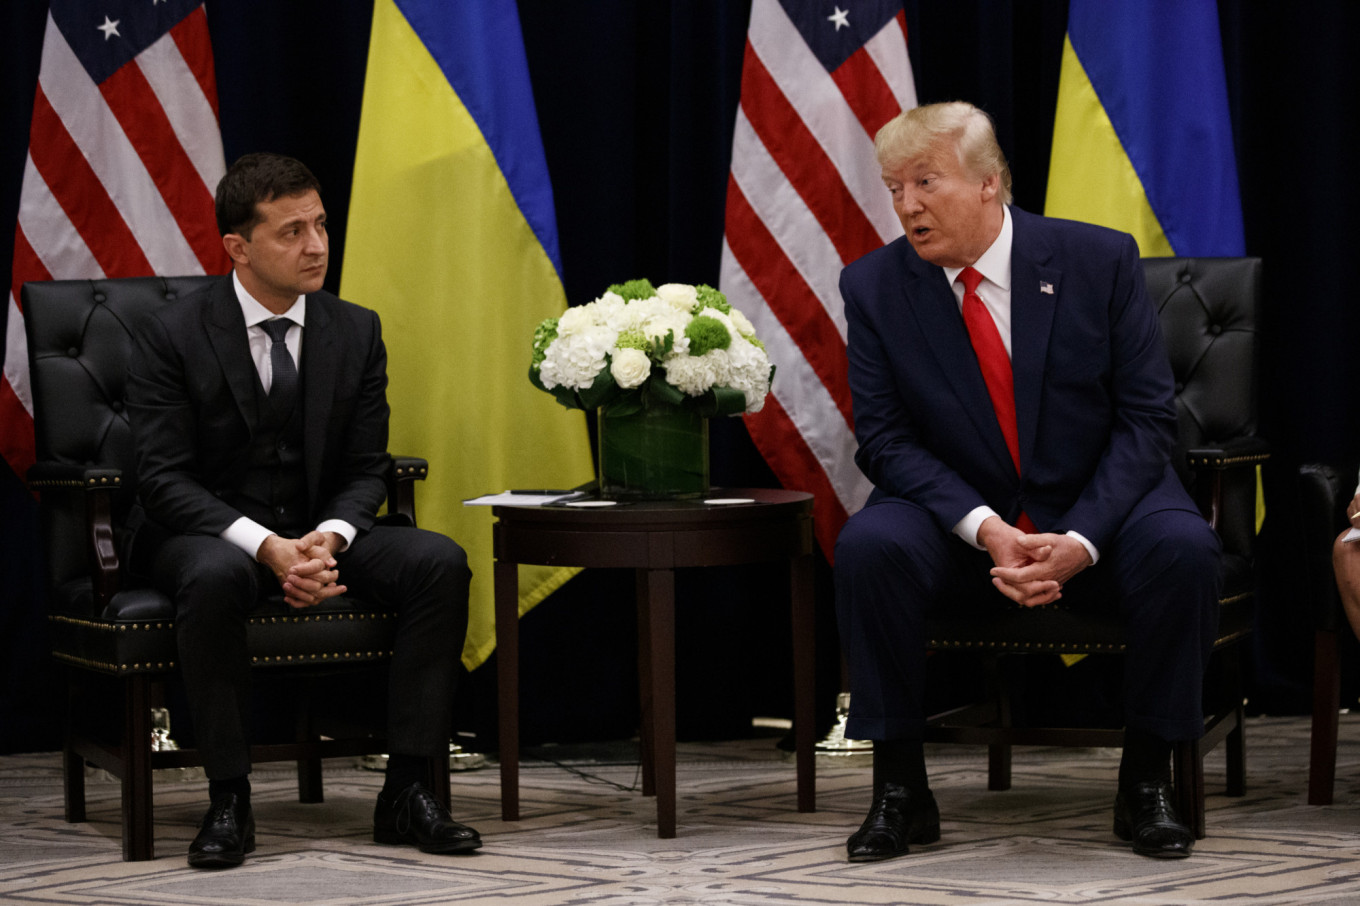 Seeking Favors, Trump Asked Ukraine President to Investigate Biden - The Moscow Times